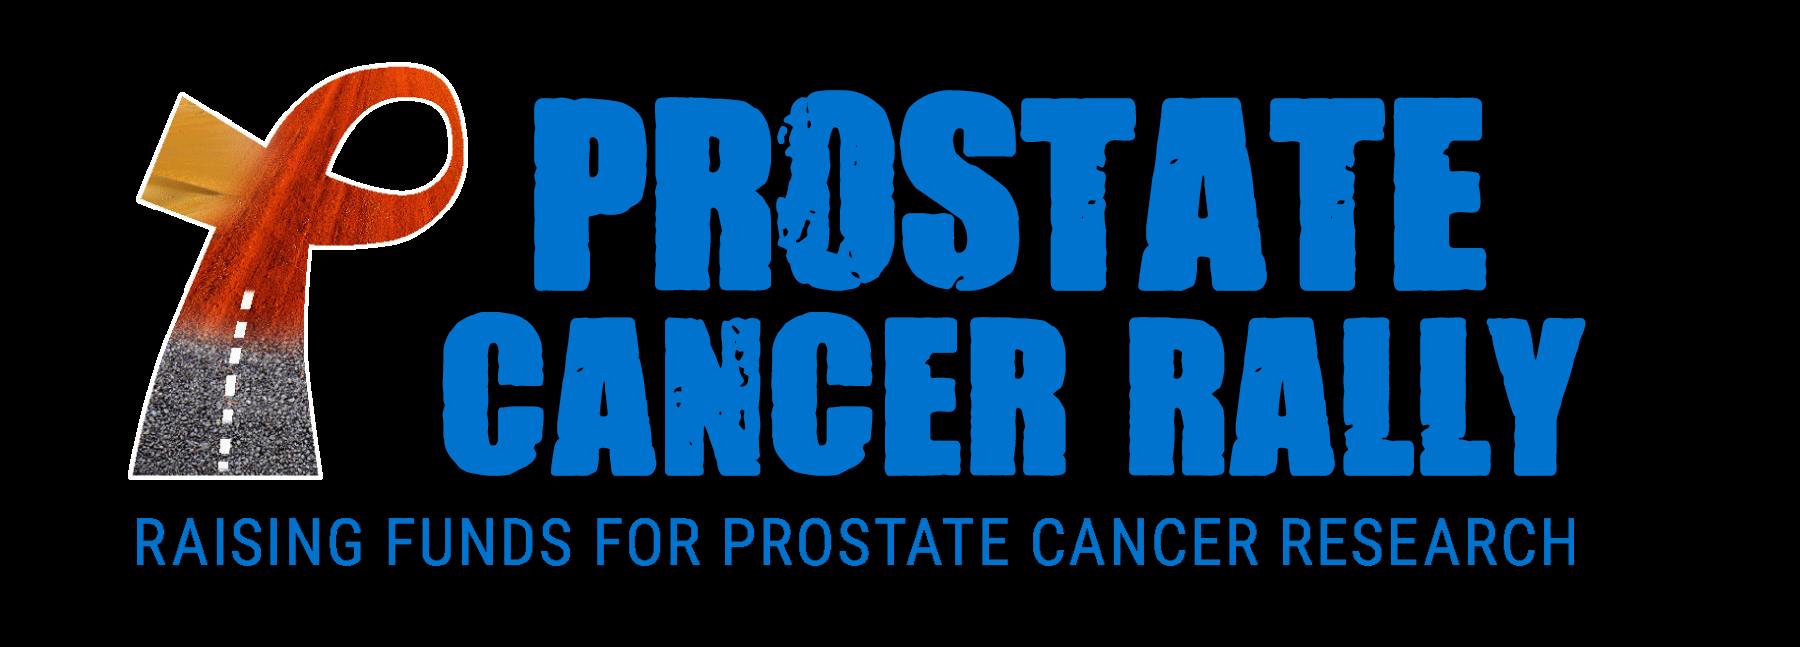 Prostate Cancer Rally